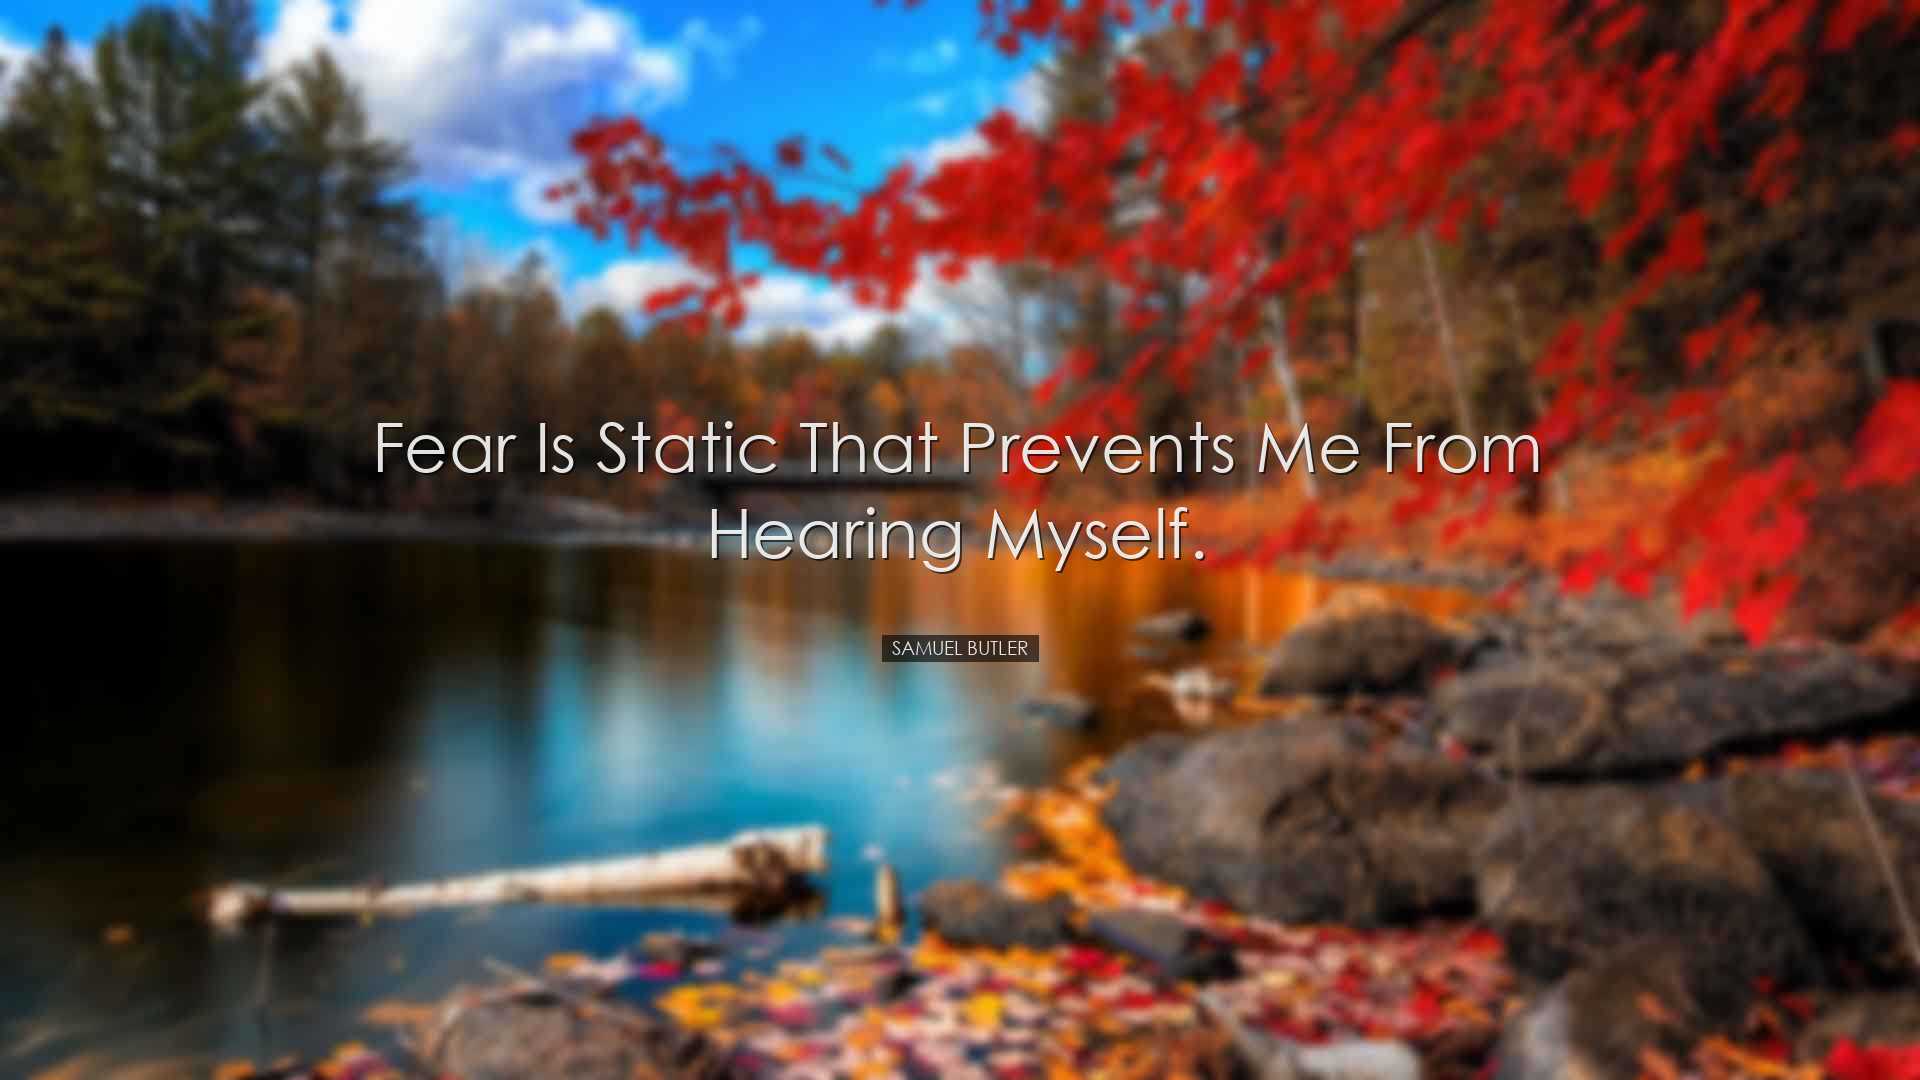 Fear is static that prevents me from hearing myself. - Samuel Butl